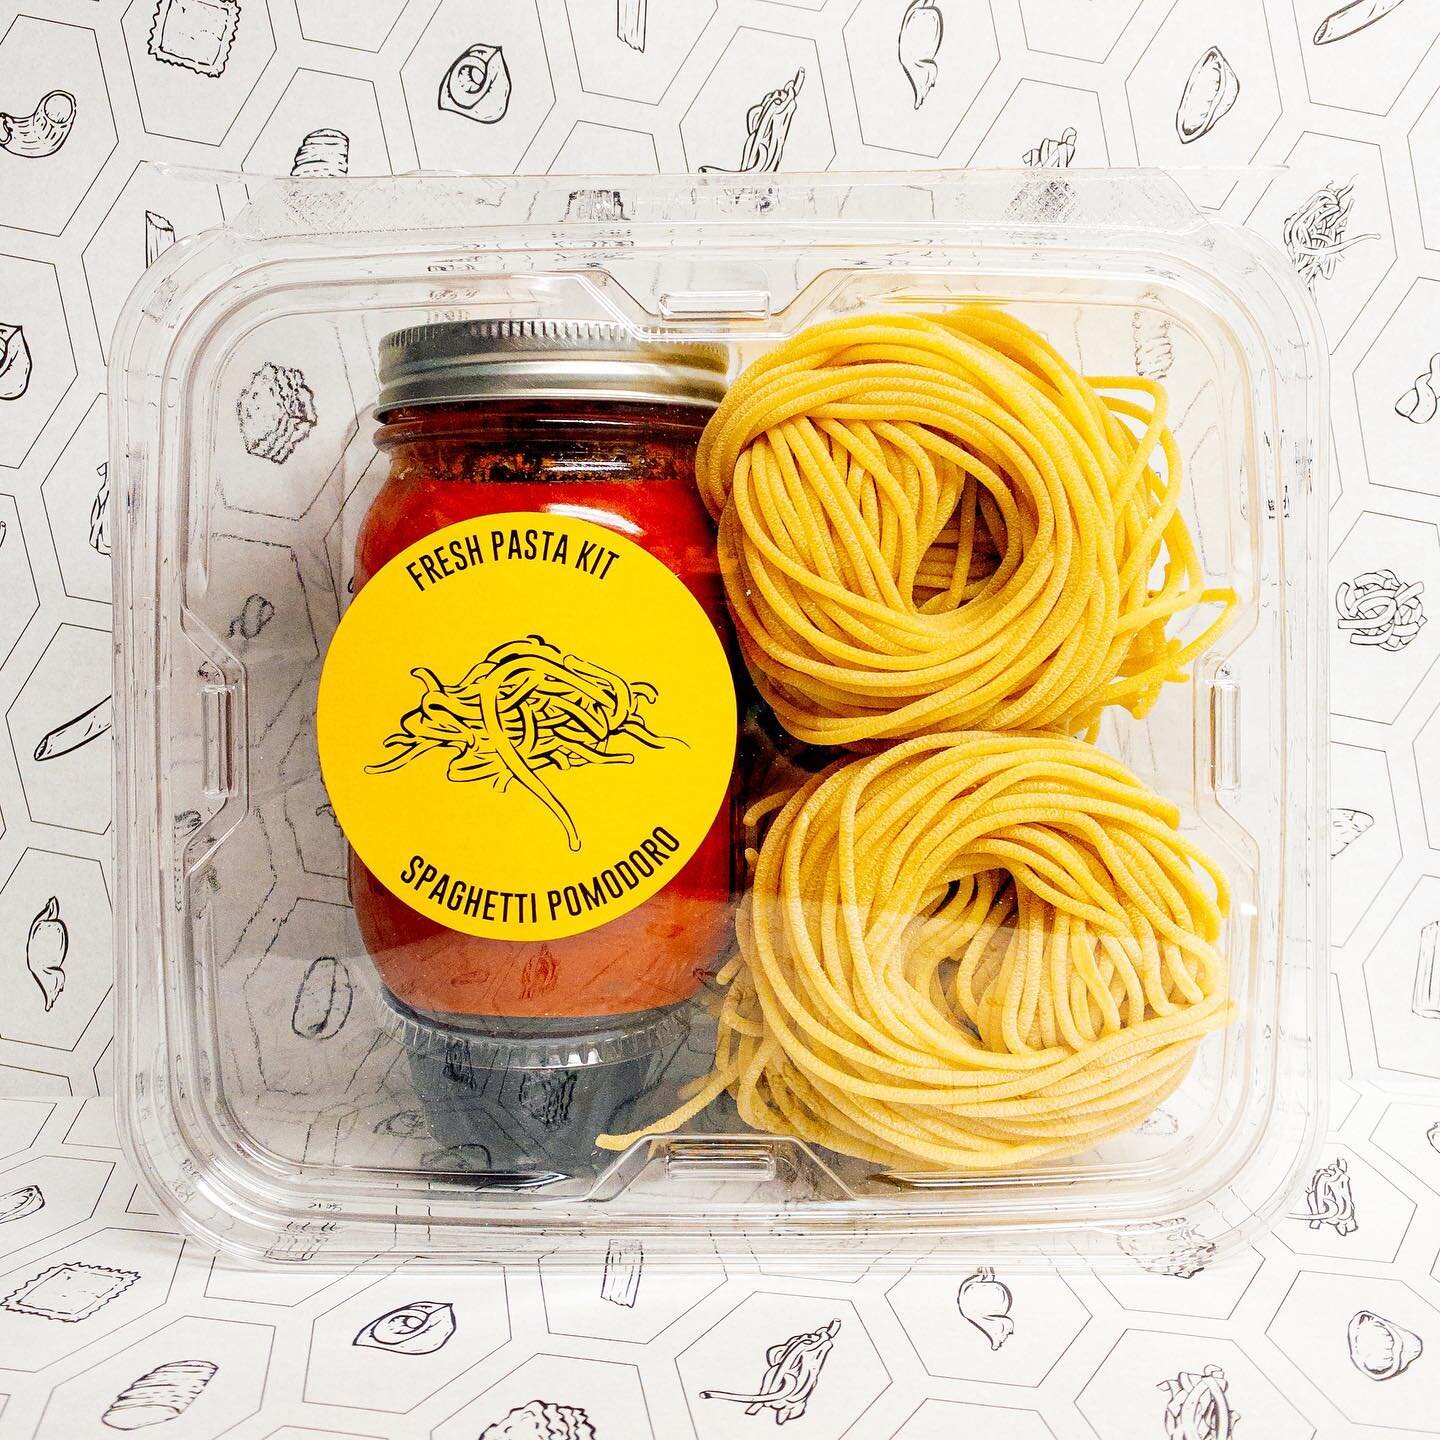 Our family could not be more excited about these new fresh pasta kits 🍝 No seriously, the family group chat is going off. Introducing our Fresh Pasta Kit (feeds four), now available via takeout, pickup and delivery 🛵